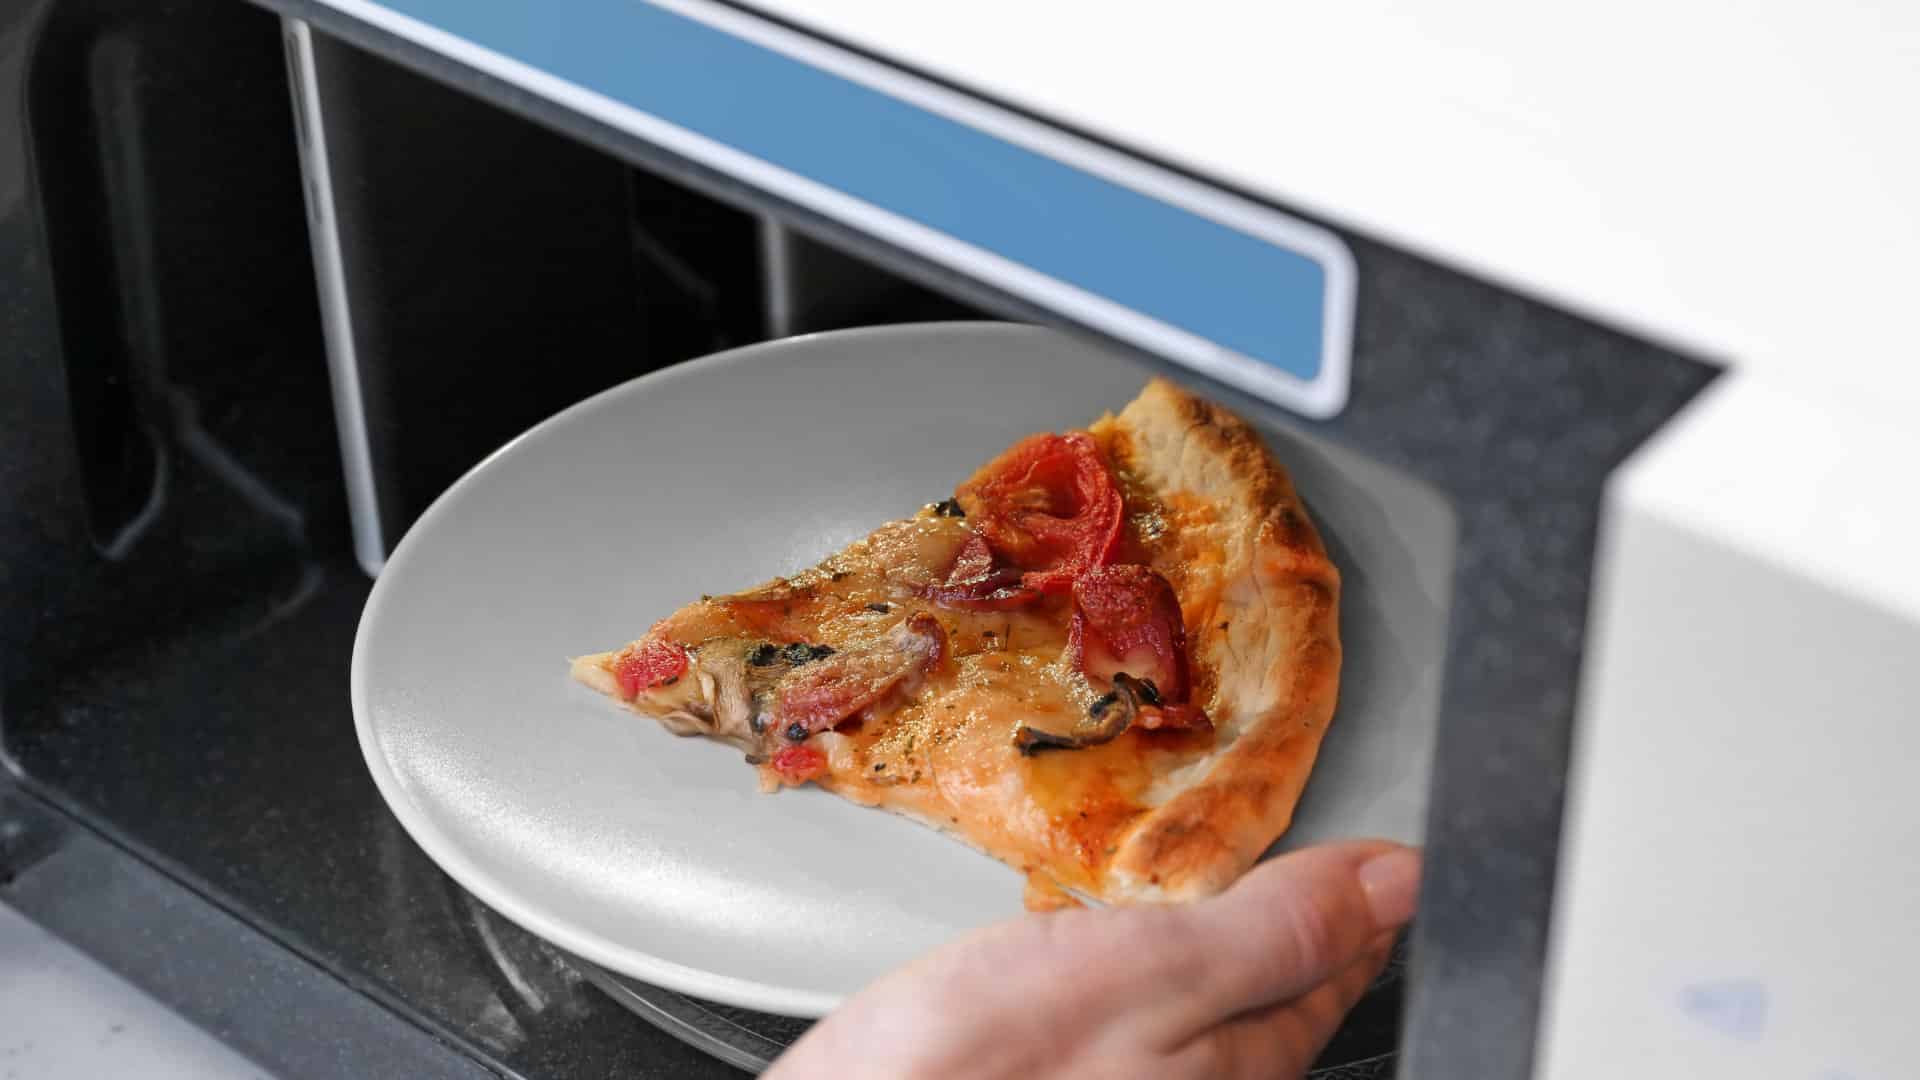 Featured image for “How To Microwave Leftover Pizza”